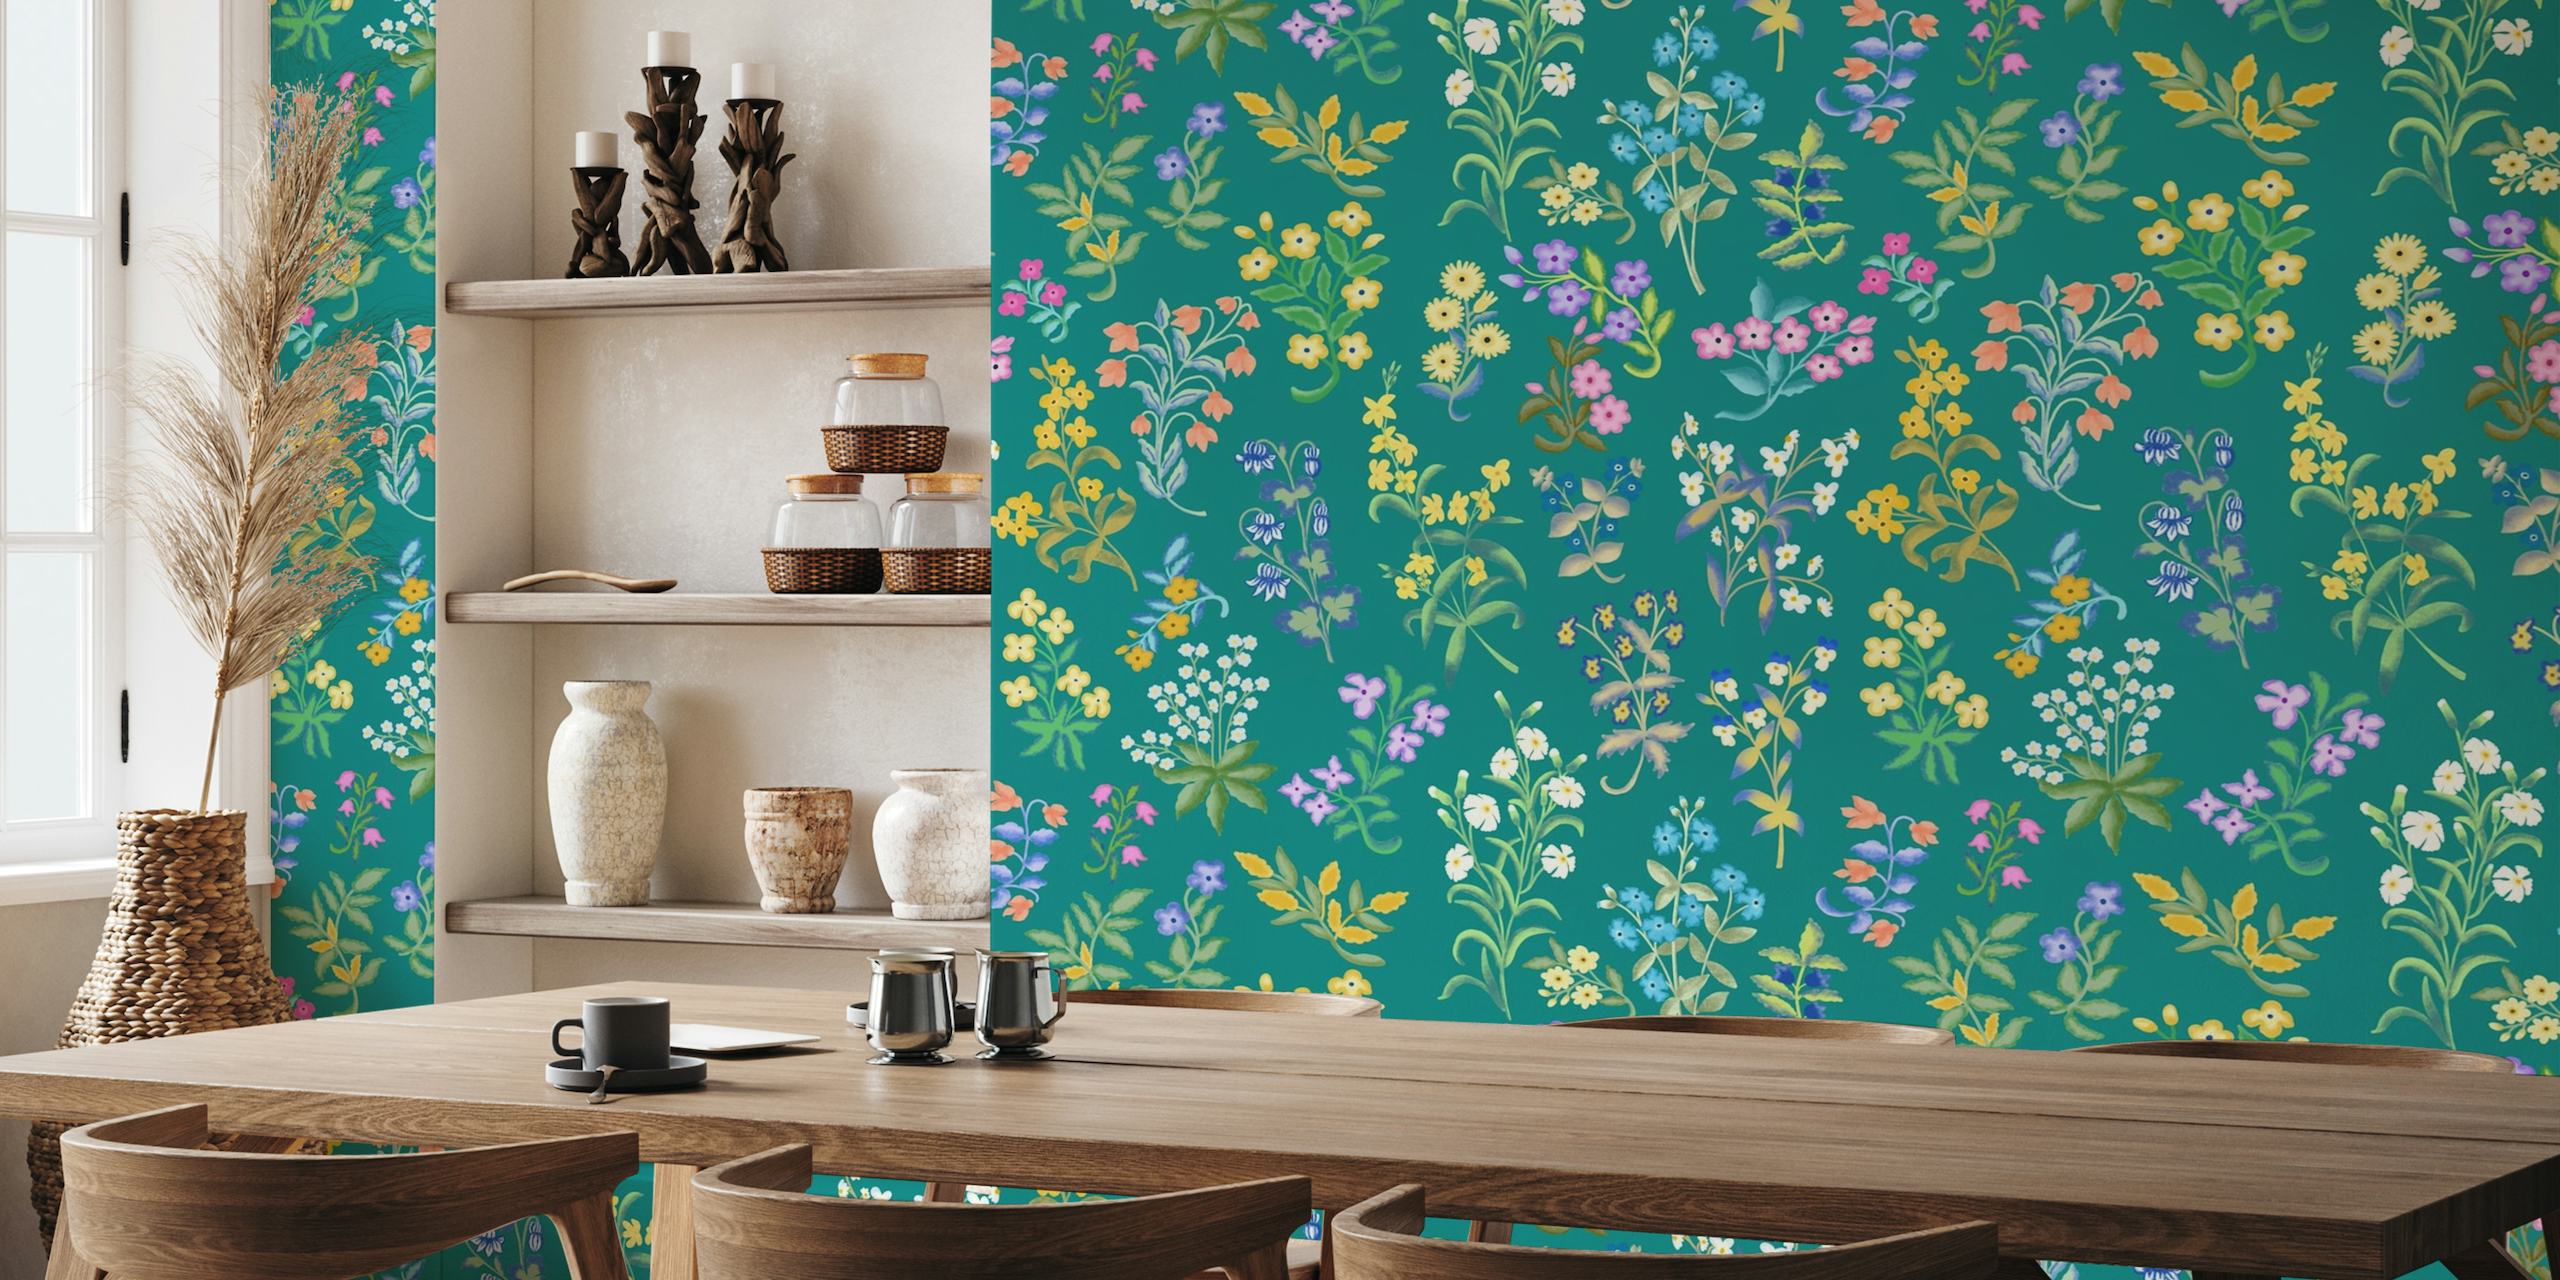 Floral millefleurs pattern wall mural with wildflowers on a teal background